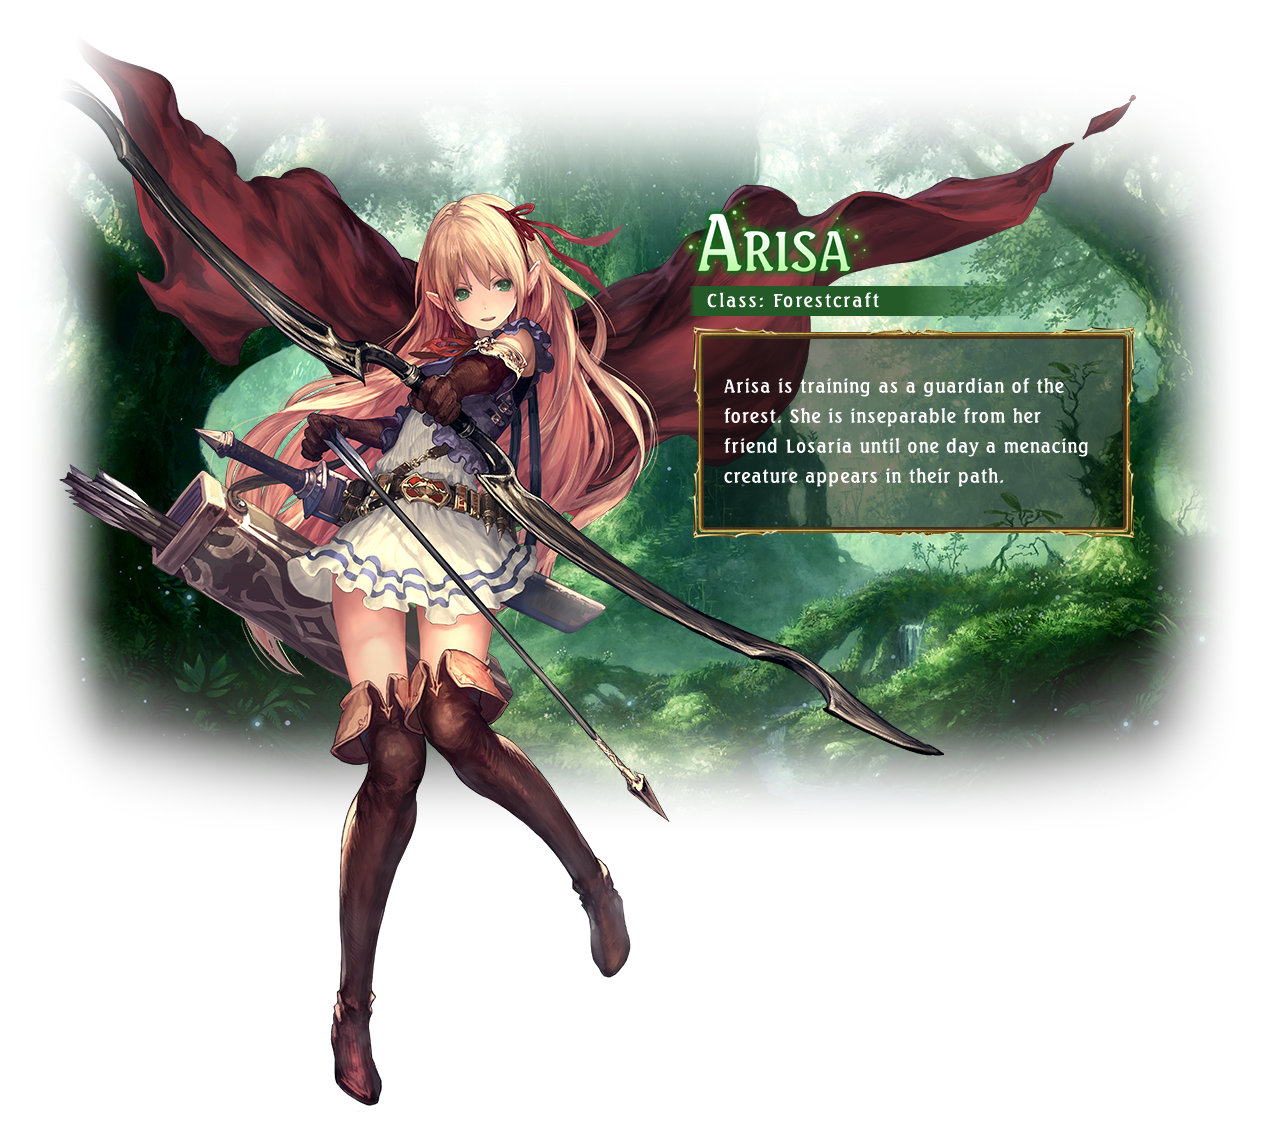 Arisa / Class: Forestcraft / Arisa is training as a guardian of the forest. She is inseparable from her friend Losaria until one day a menacing creature appears in their path.